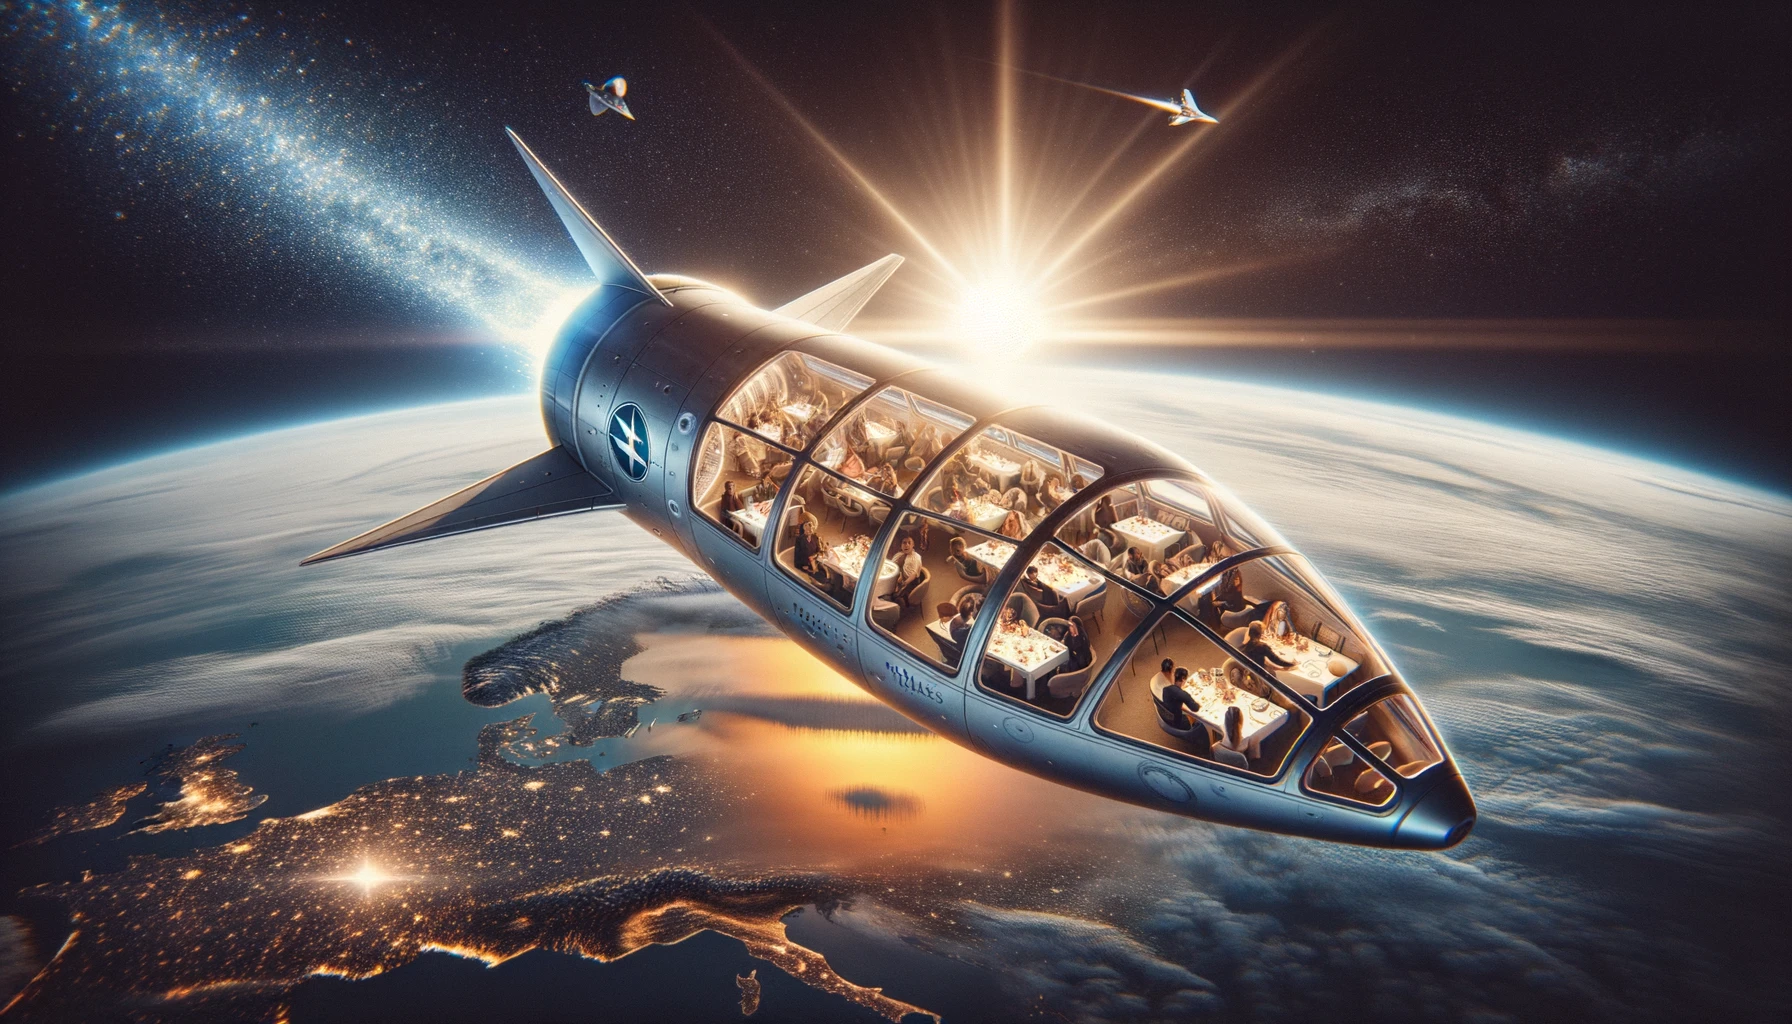 State-of-the-art spacecraft with the 'Rocket Breaks' logo soaring above Earth, illuminated by a distant sunrise. The spacecraft leaves a shimmering trail. Inside its spacious cabin, diverse passengers engage in various activities, from dining to gazing at the celestial view, all in an ambiance of luxury. The caption reads: 'Rocket Breaks - Elevating Your Journey Amongst the Stars in luxury space travel